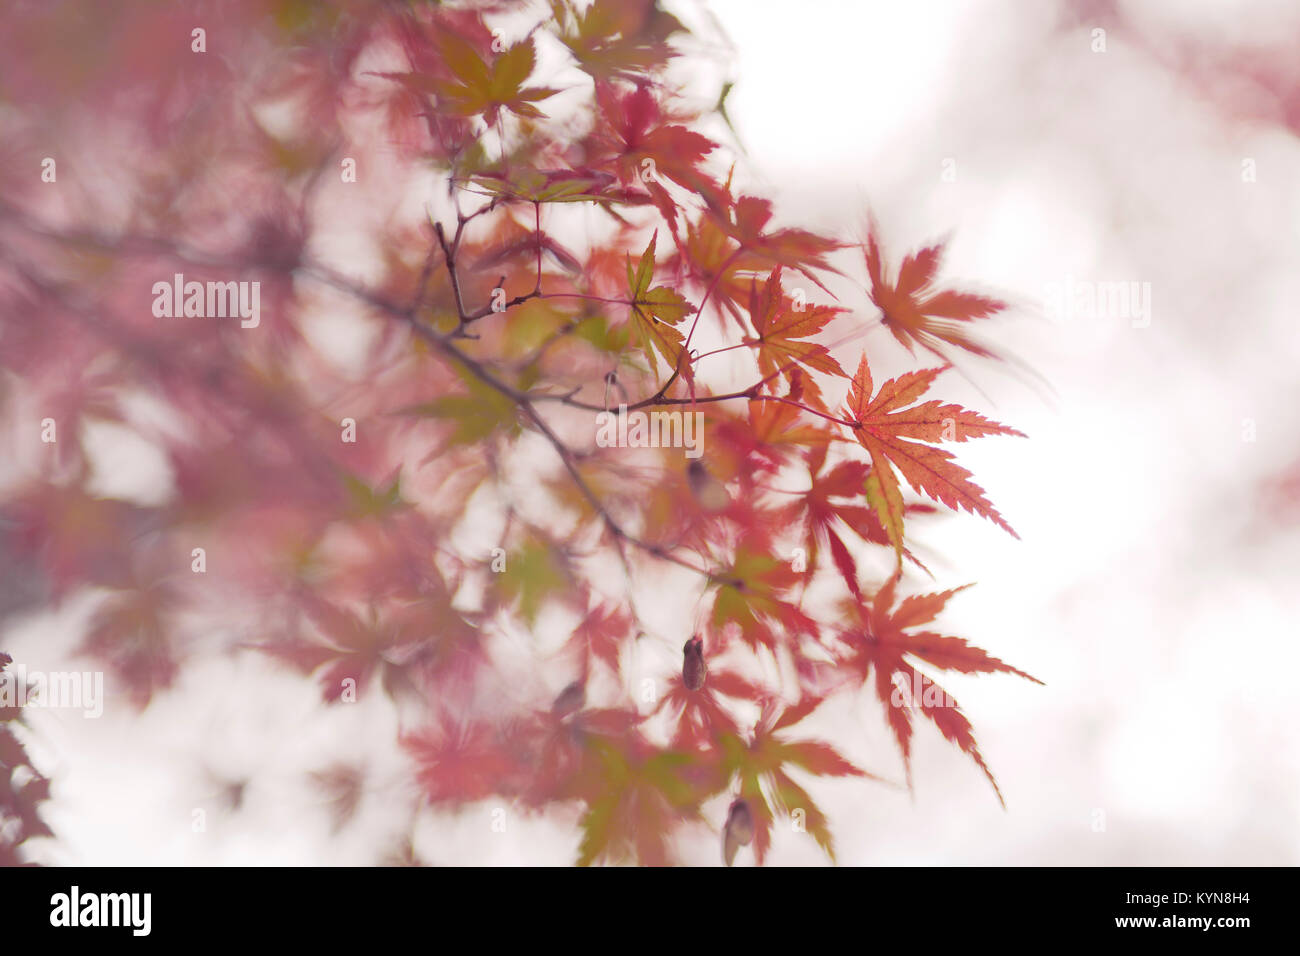 License and prints at MaximImages.com - Beautiful artistic closeup of Japanese maple, Acer palmatum, red leaves in autumn mist on white foggy backgrou Stock Photo